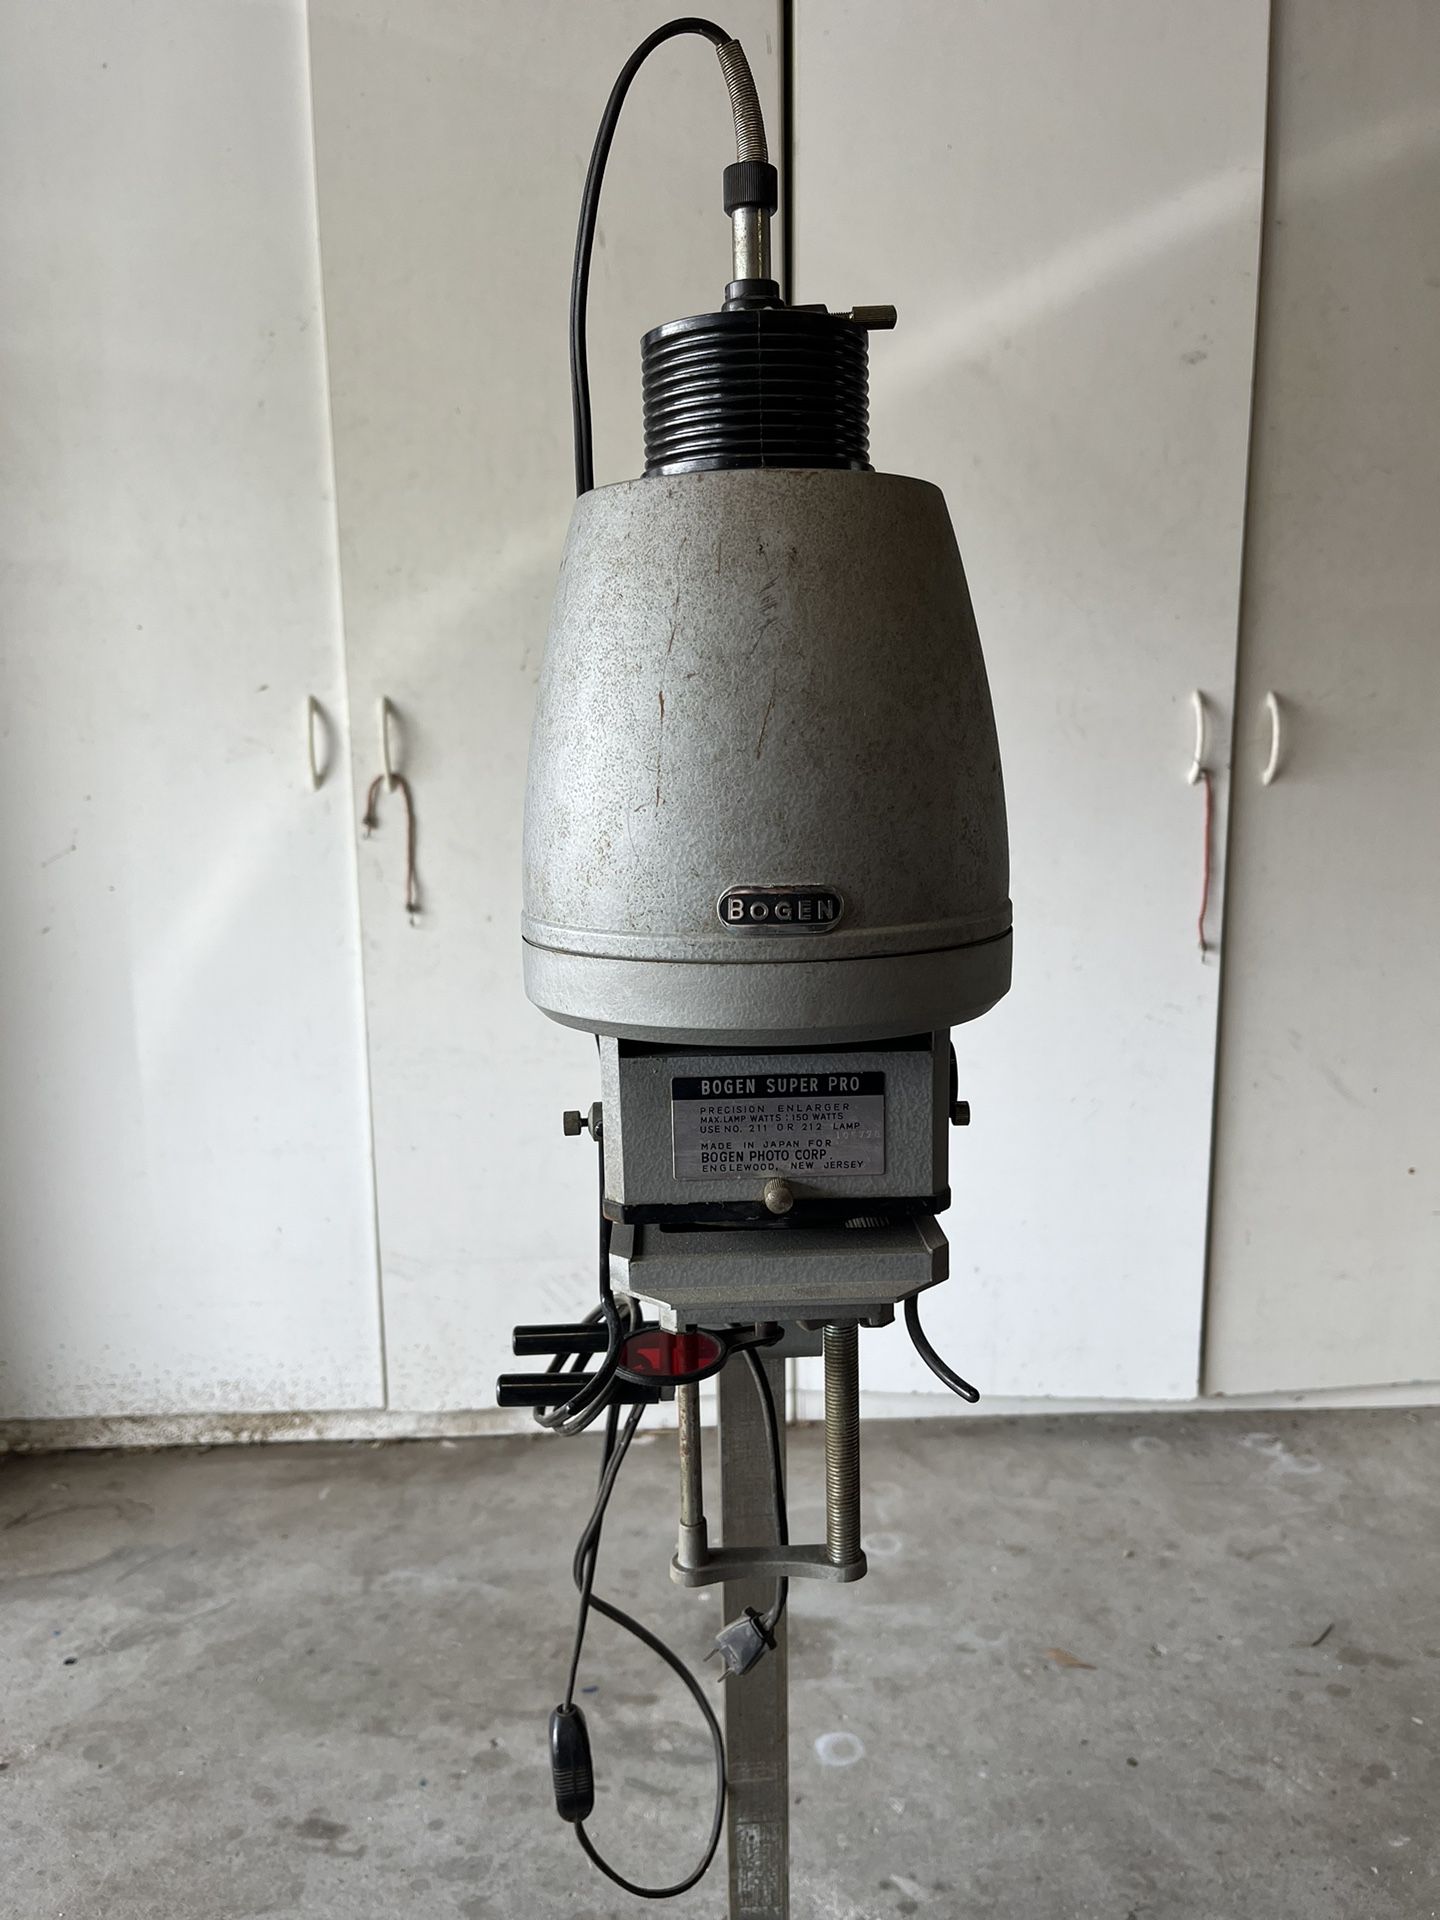 Photographic Print Enlarger